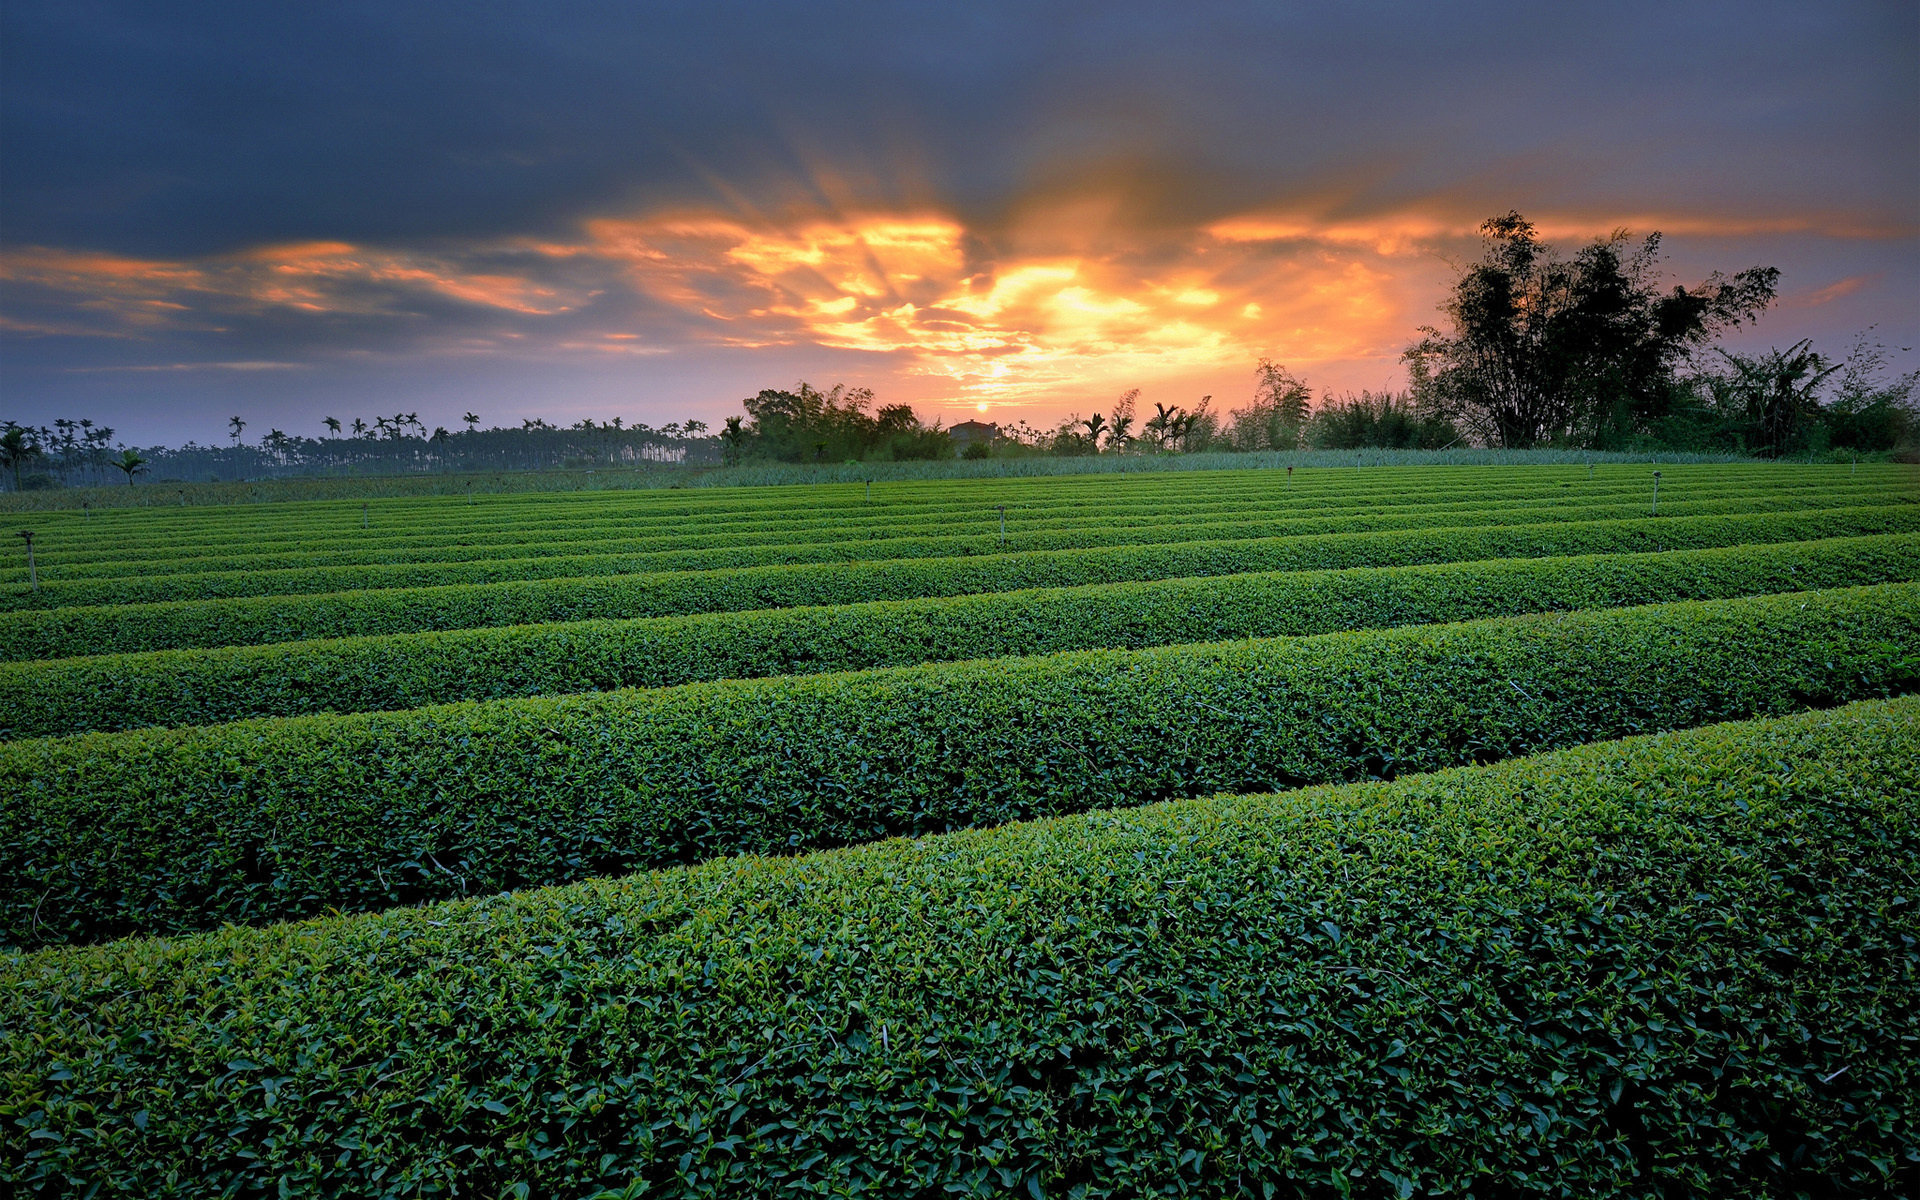 herbs, Crops, Farm, Fields, Nature, Landscapes, Row, Pattern, Leaves, Trees, Sky, Clouds, Sunset, Sunrise Wallpaper